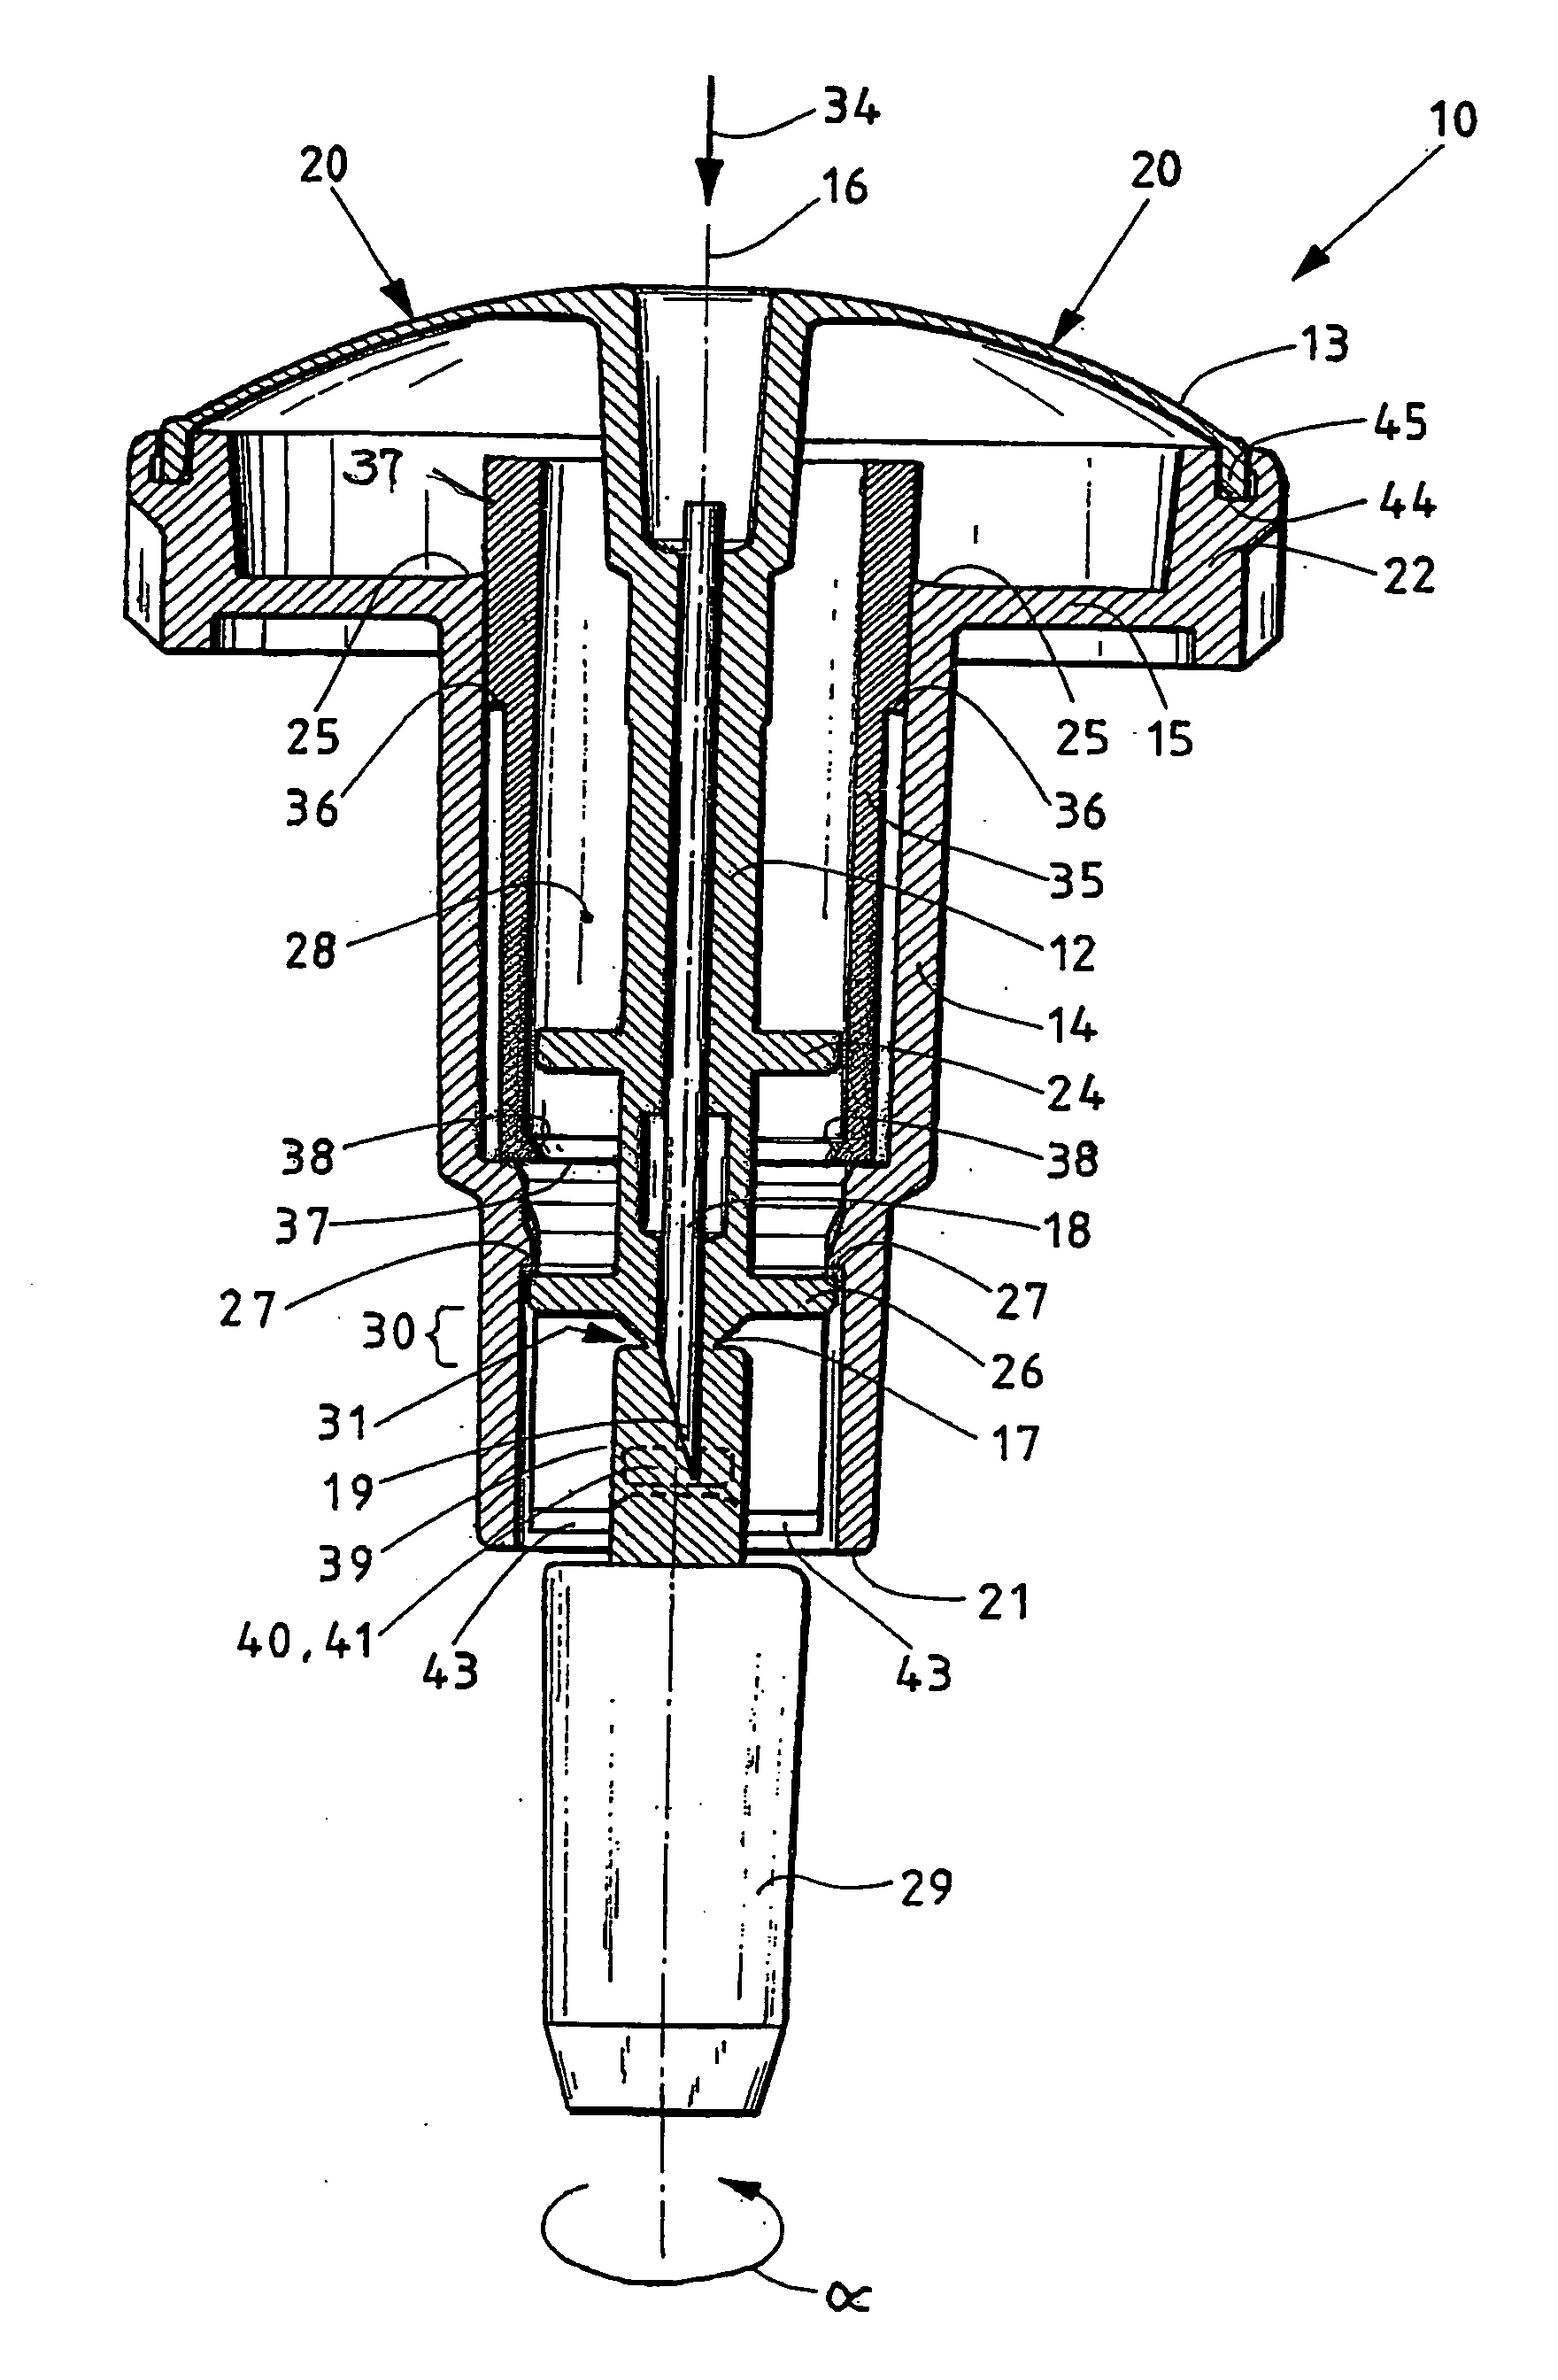 Lancet device for puncturing the skin